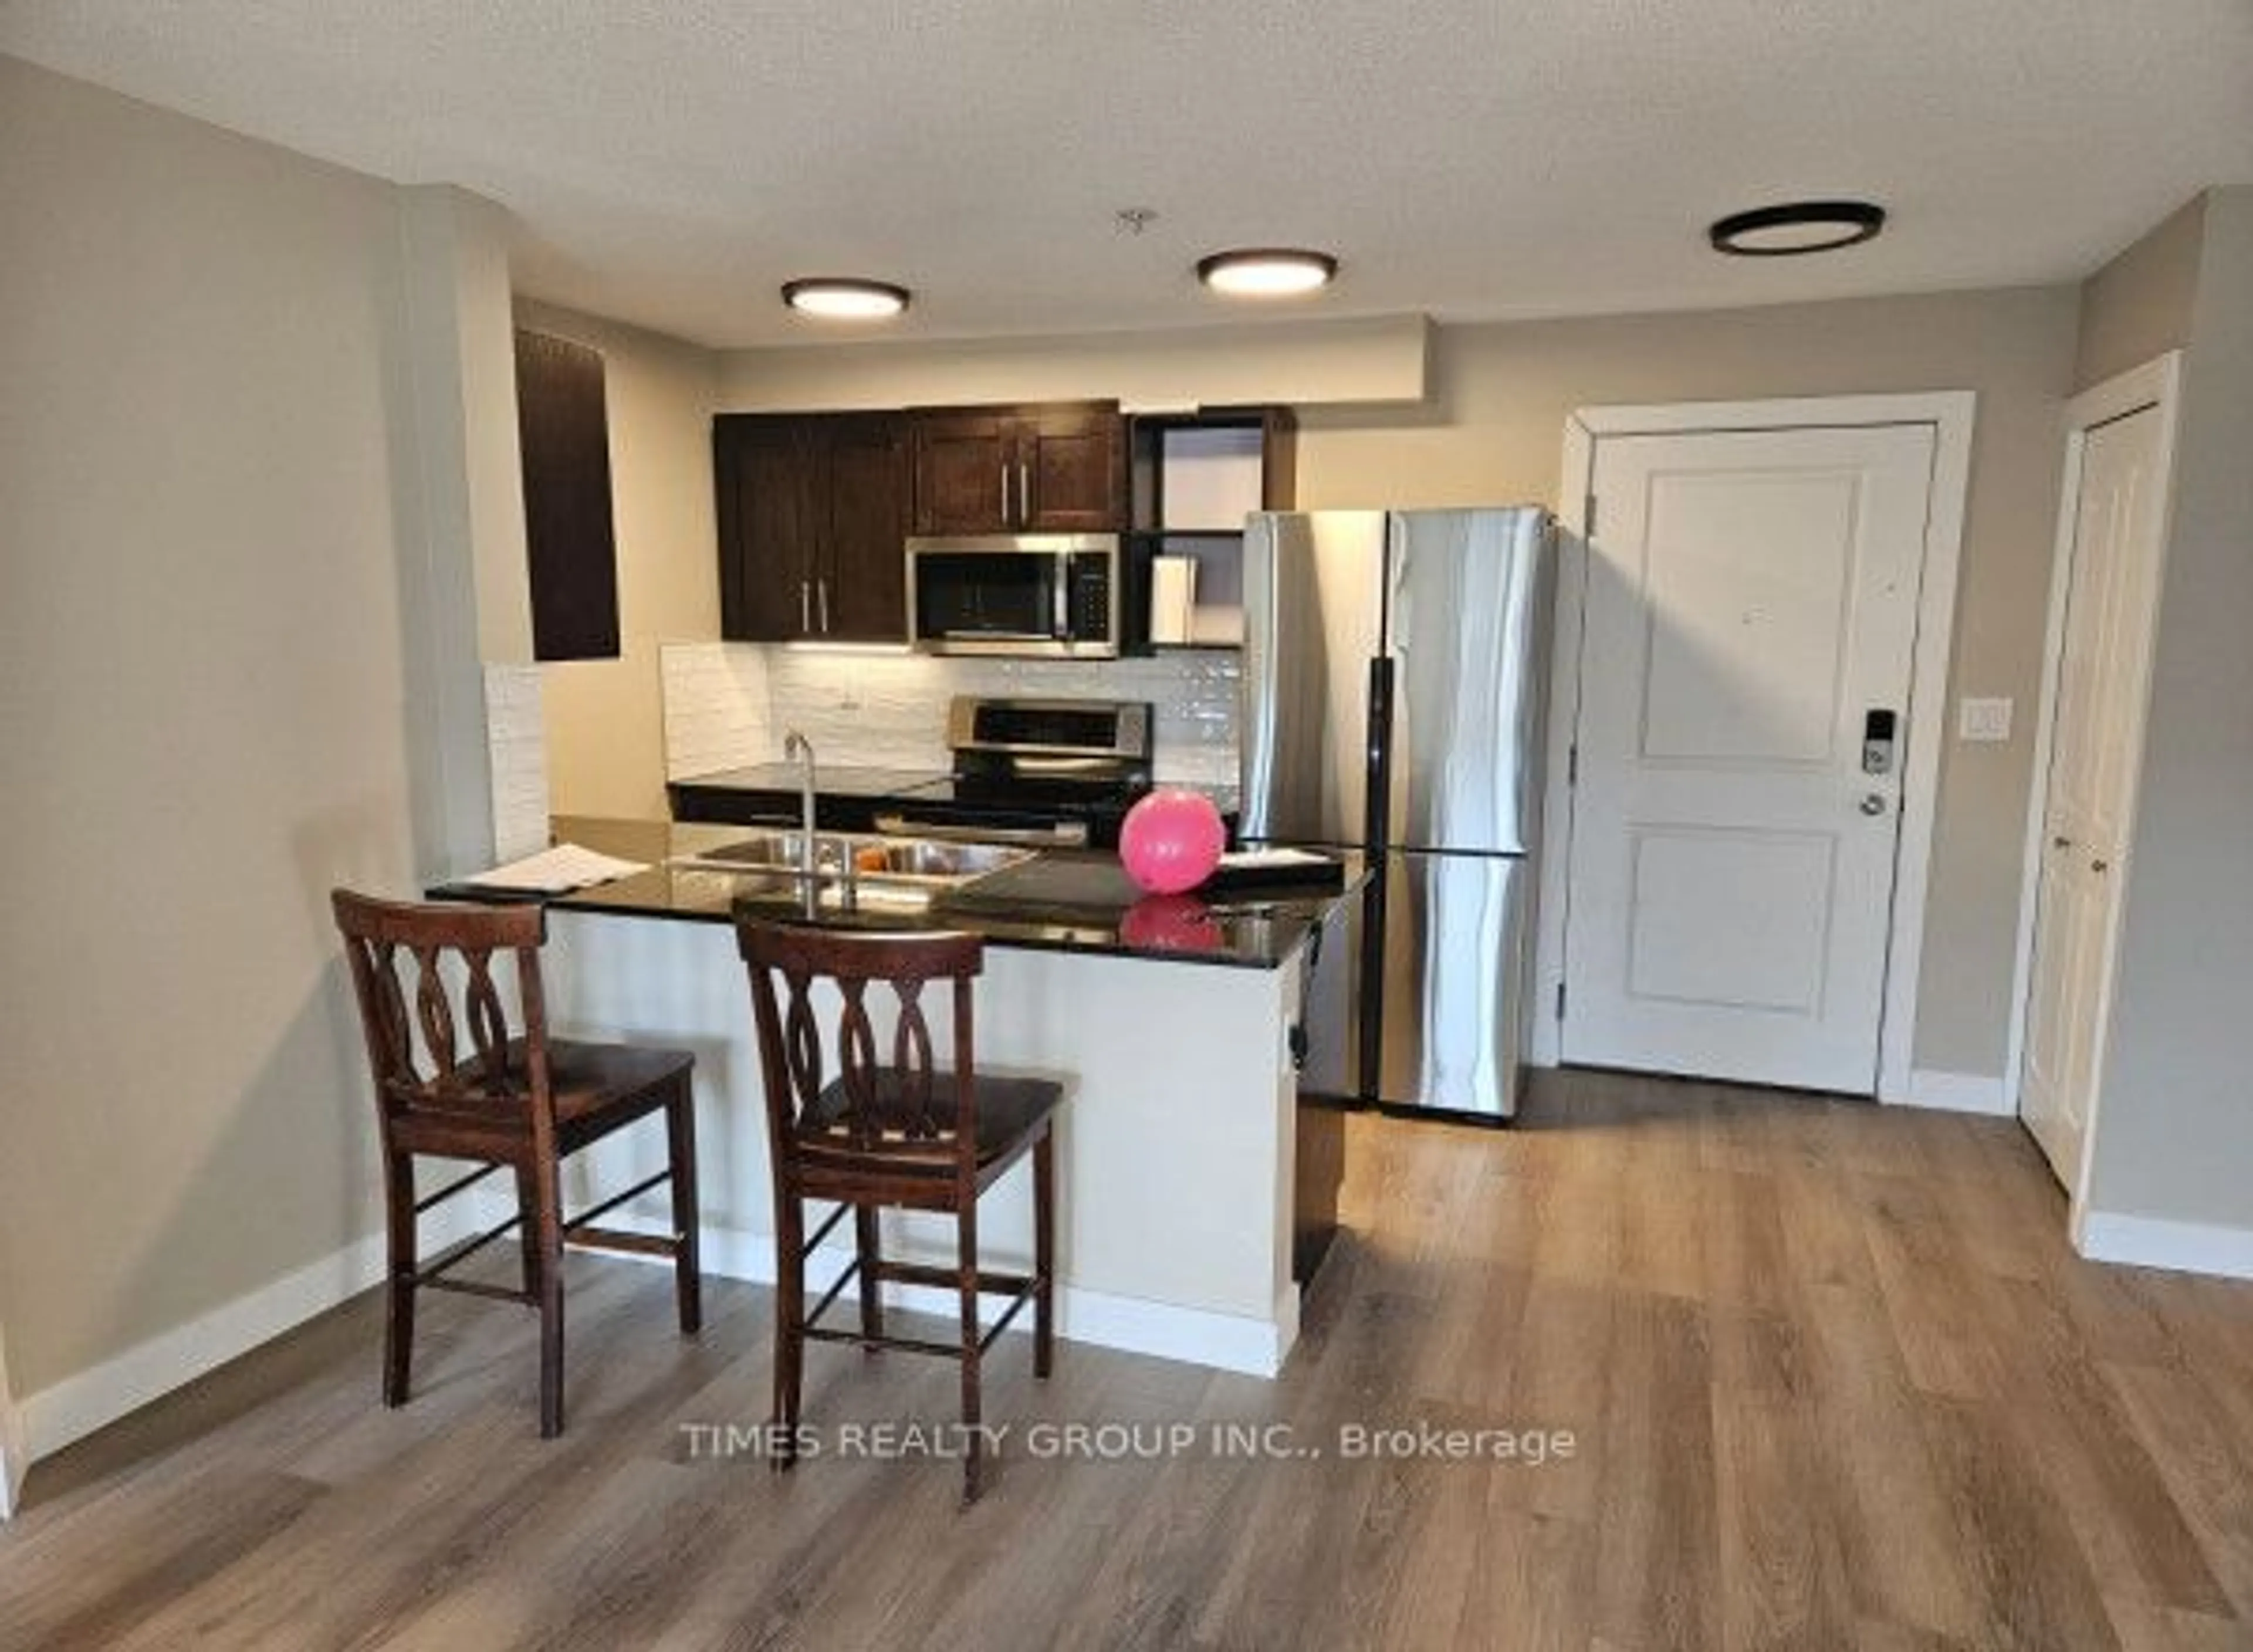 Standard kitchen for 403 Mackenzie Way Sw #1405, Out of Area Alberta T4B 3V7